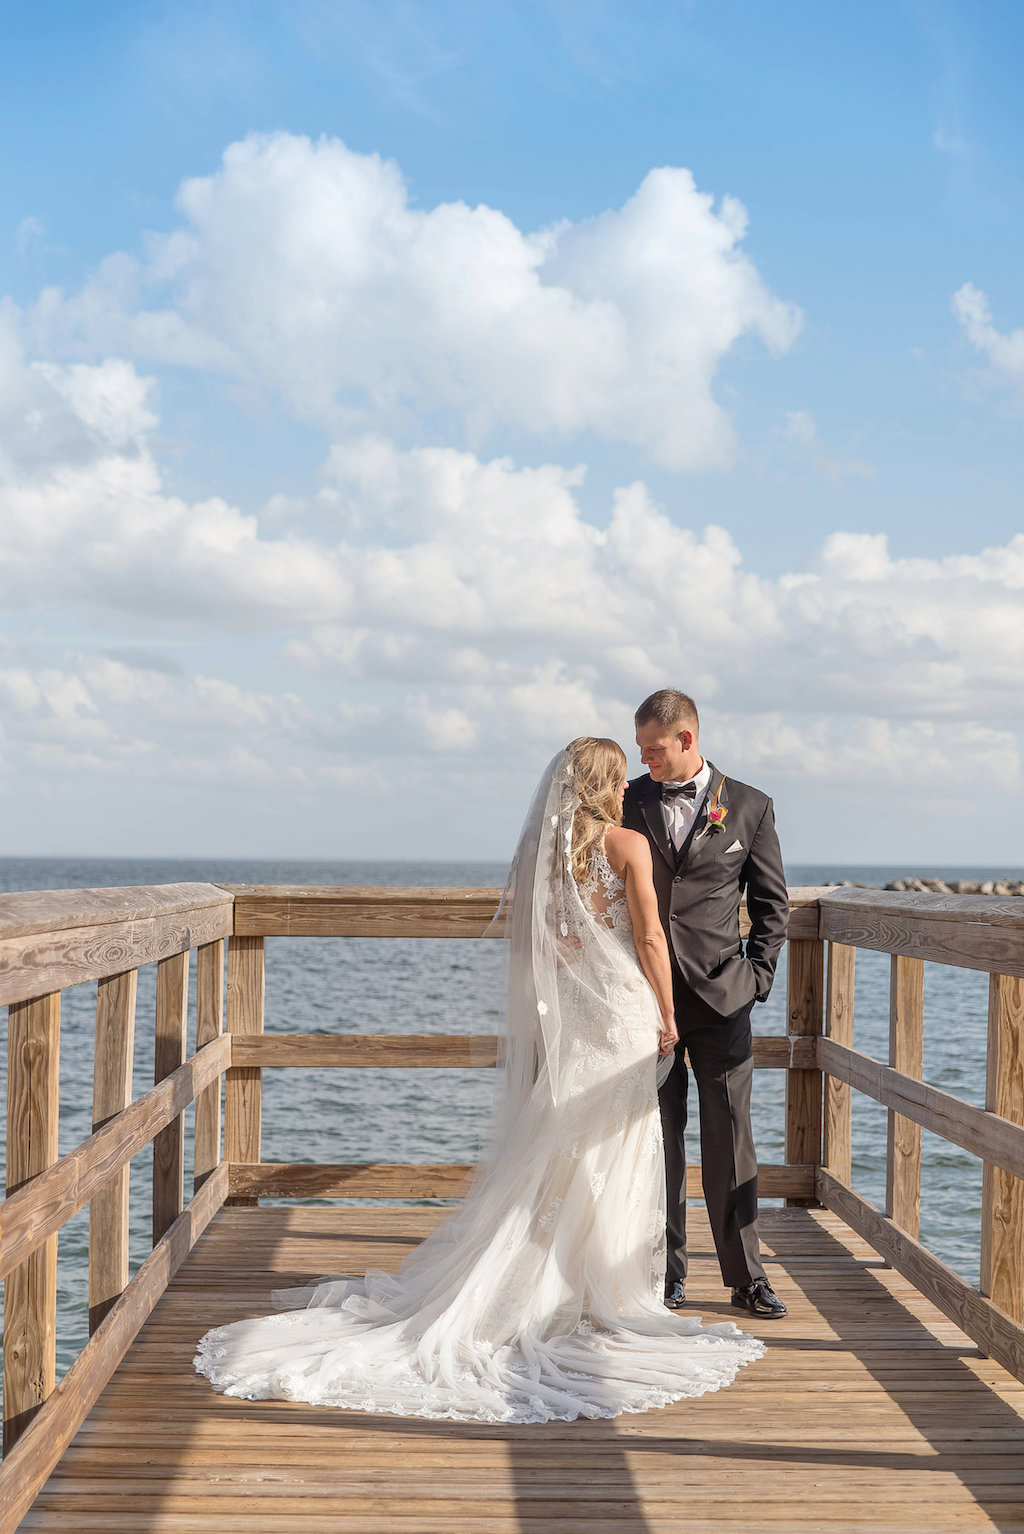 Old Florida Themed Outdoor Waterfront Bride and Groom Wedding Portrait on Dock, Bride in Cathedral Train Essence of Australia Wedding Dress with Floorlength Veil | St Pete Wedding Photographer Kristen Marie Photography